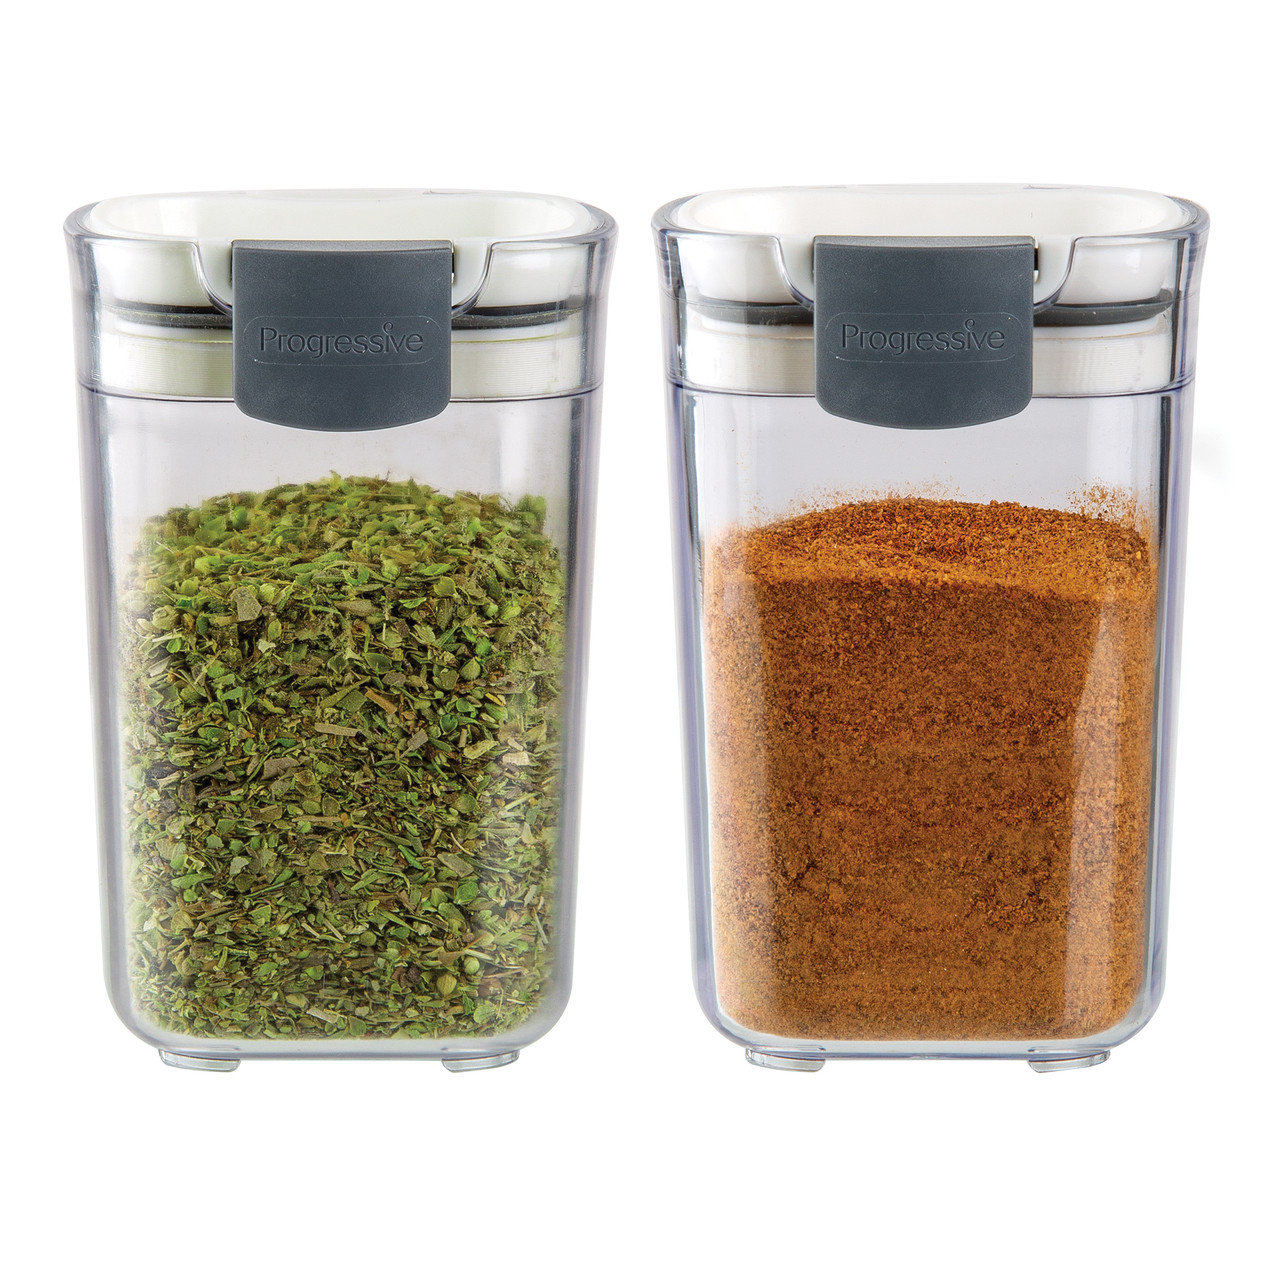 Product Spotlight - Spice Containers